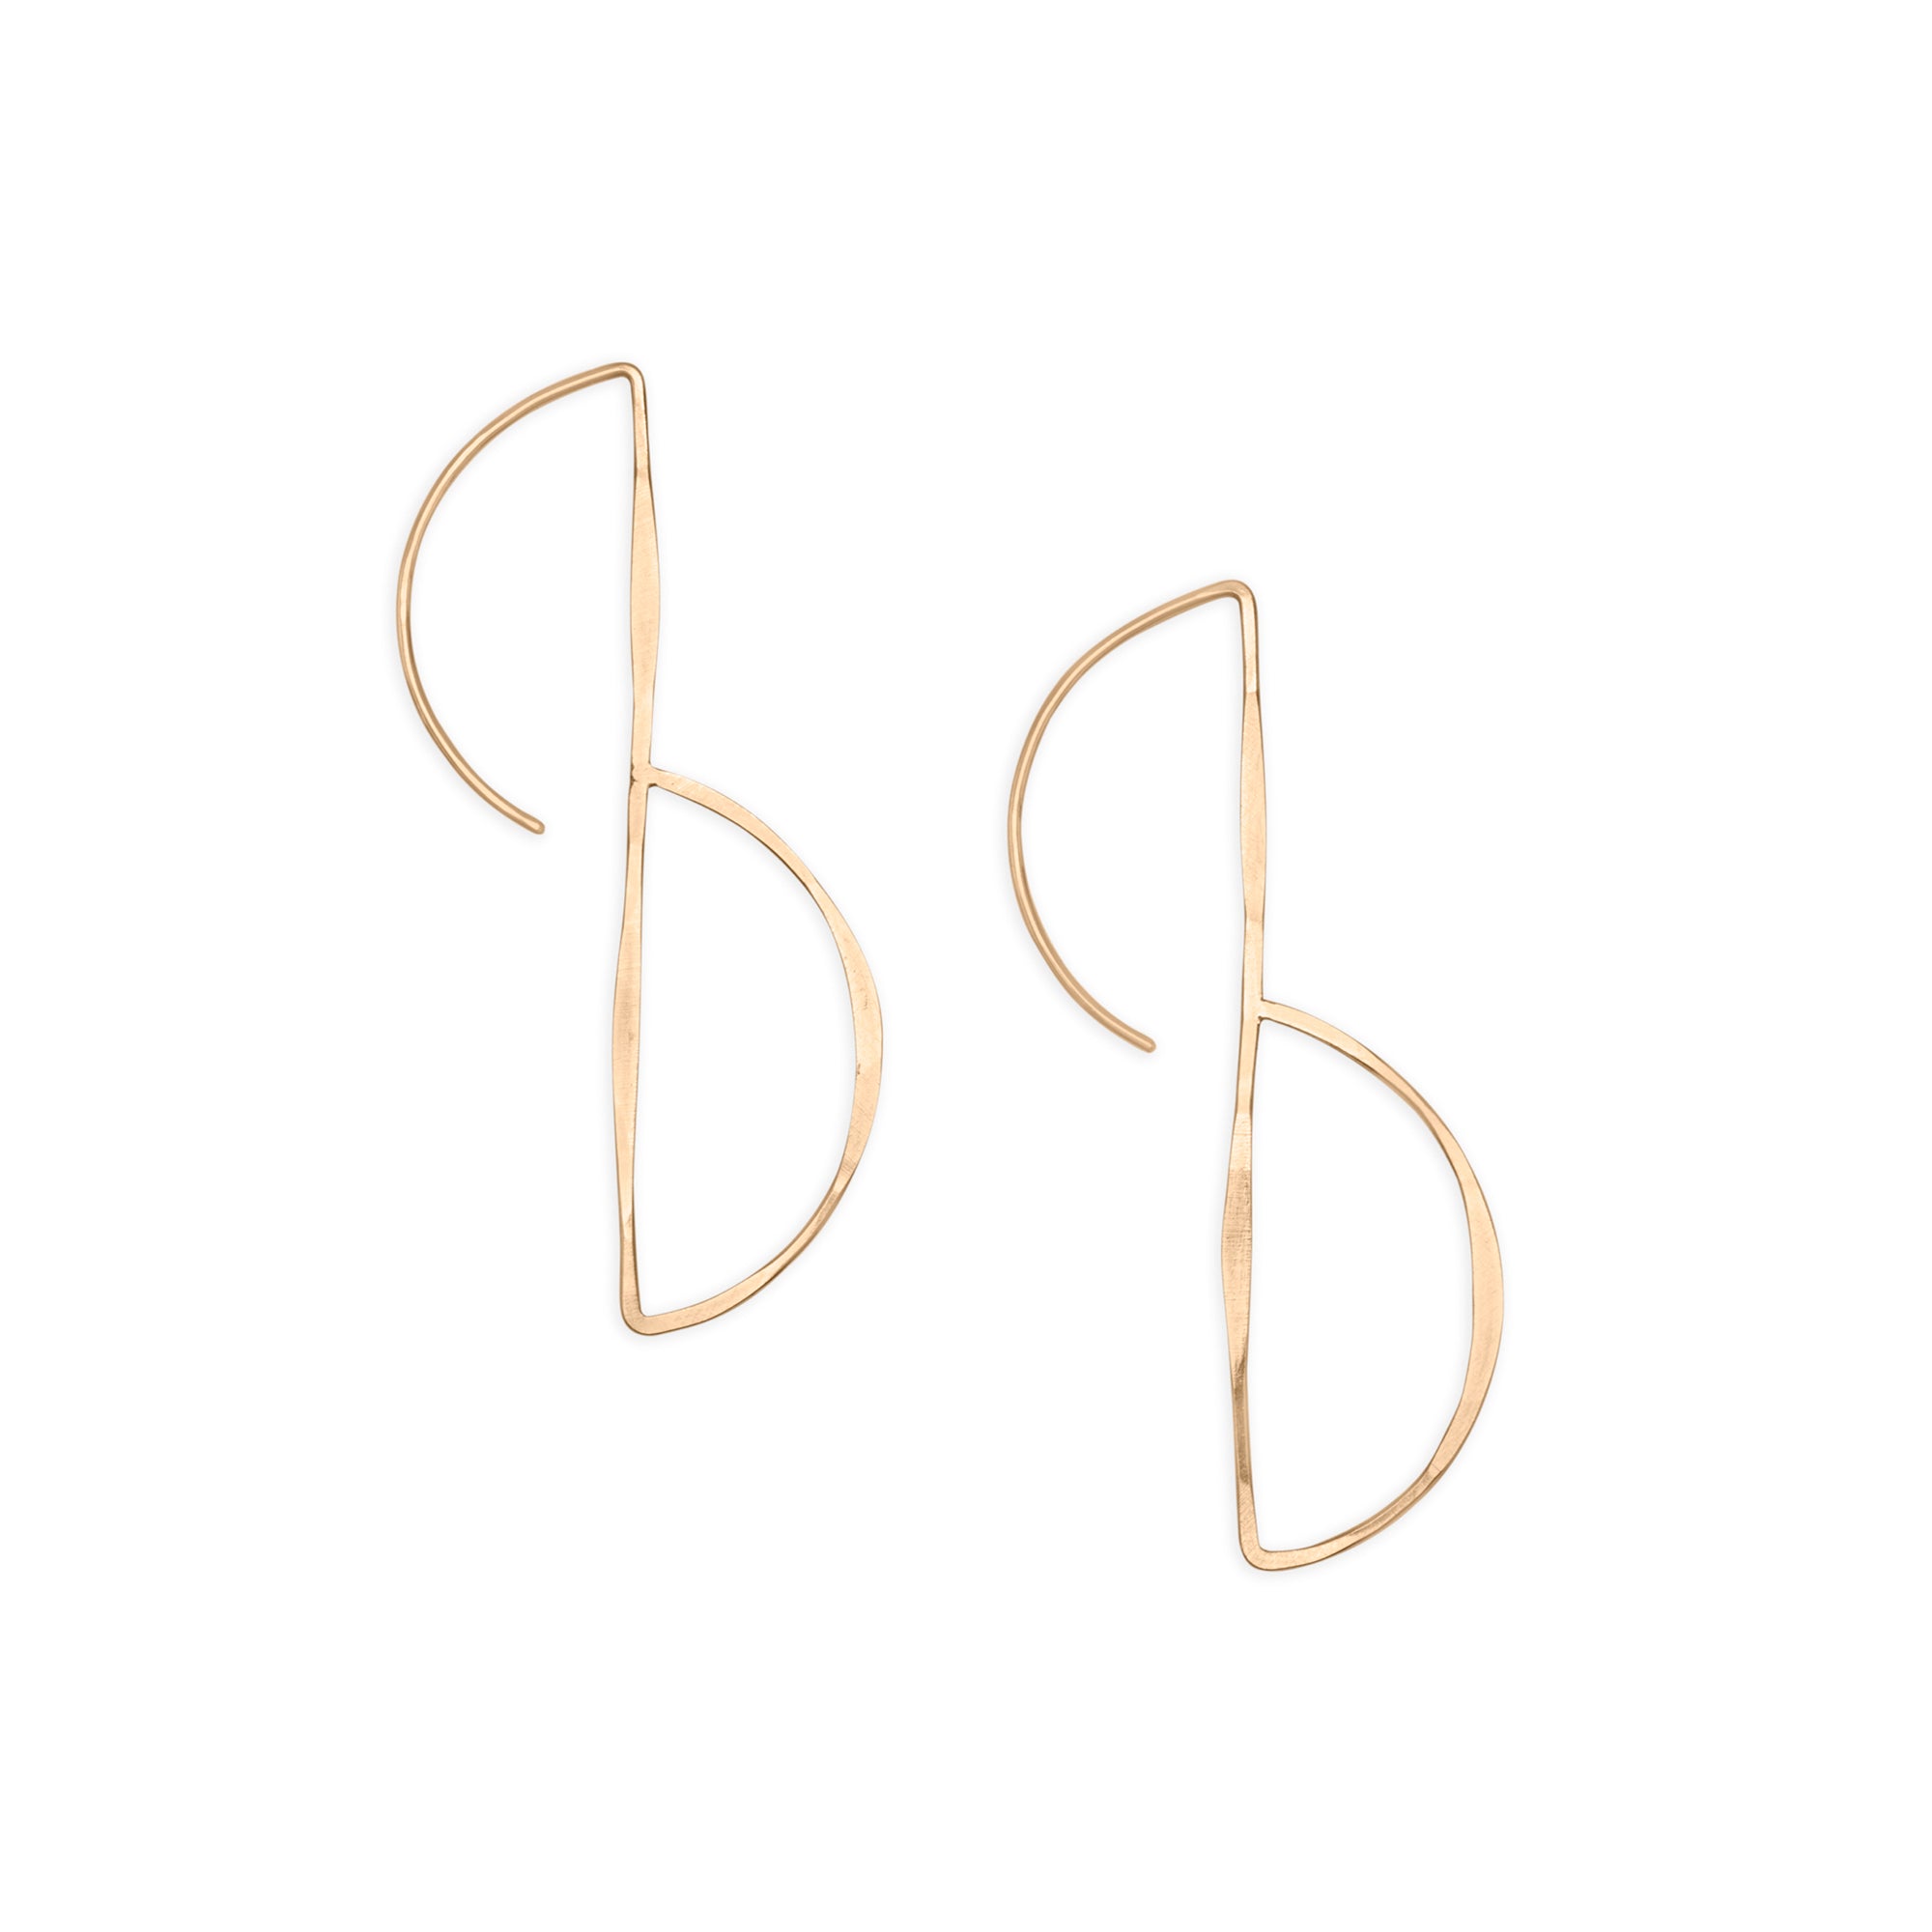 The Union Hook earring features a forward-facing semicircle suspended delicately from a 14k wire drop